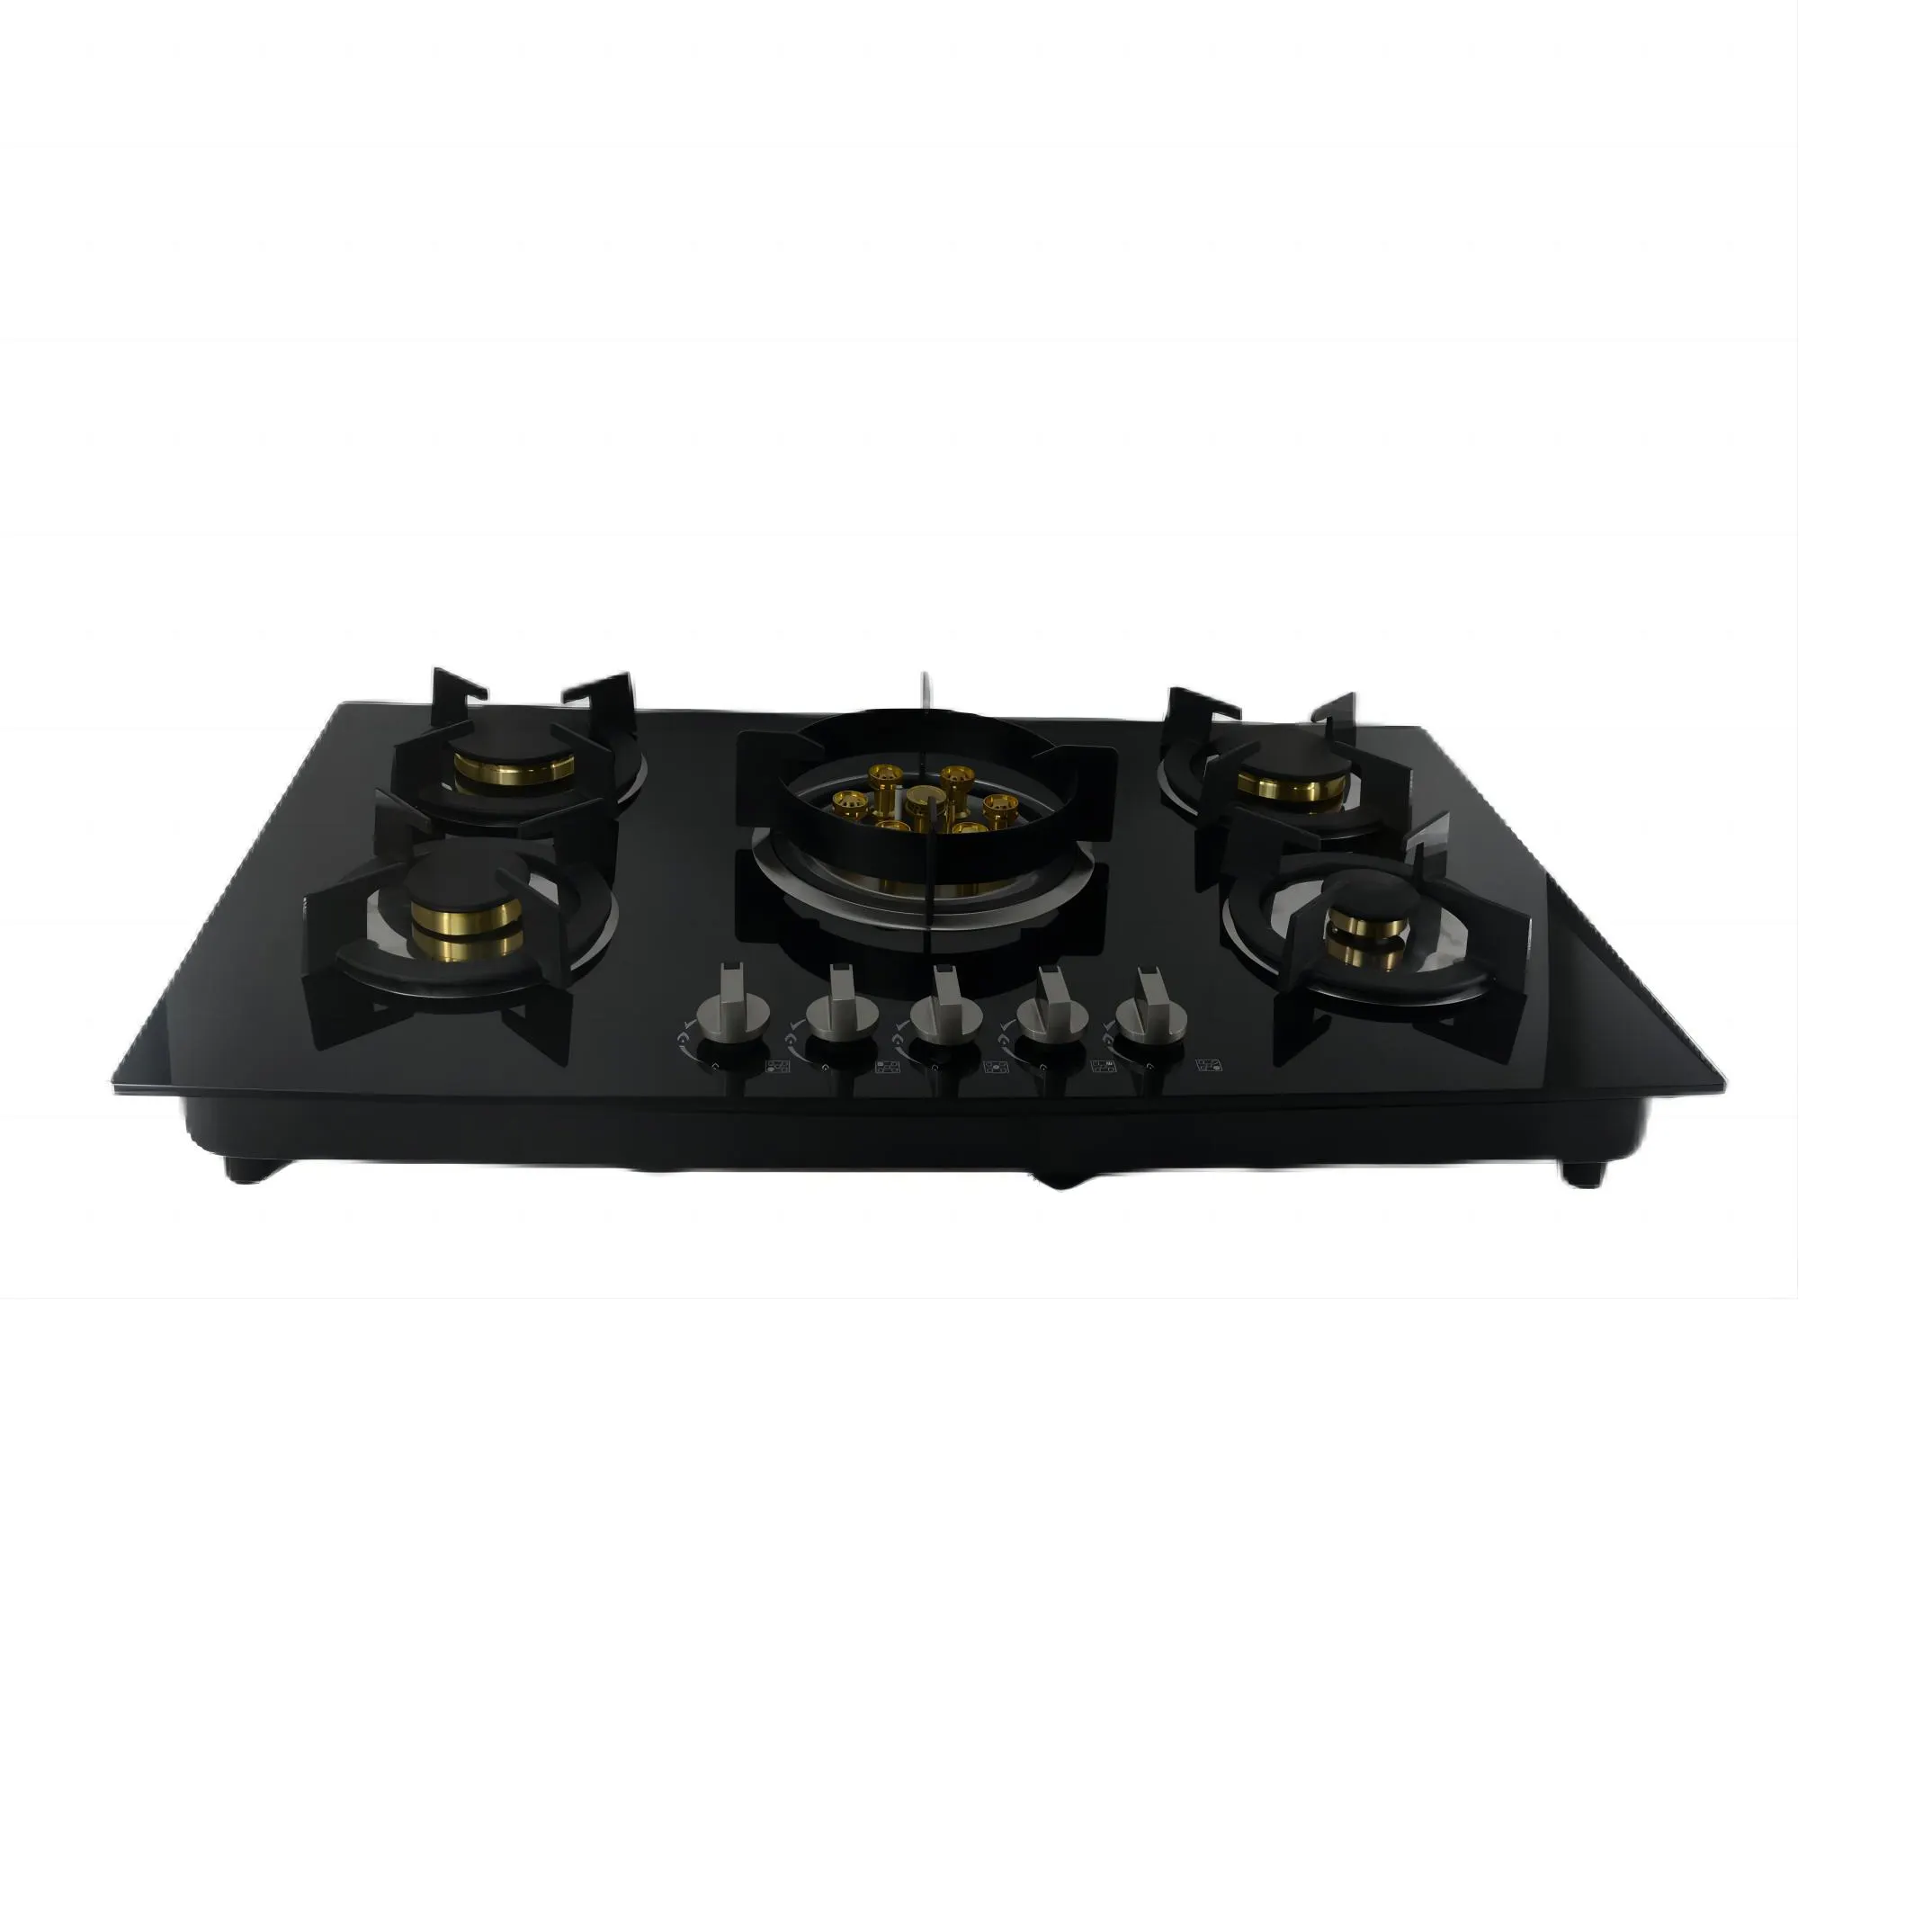 4-Head Gas Stove with Induction Cooker Large Panel Flameout Protection Device-for Household and Hotel Use Manual Power Supply